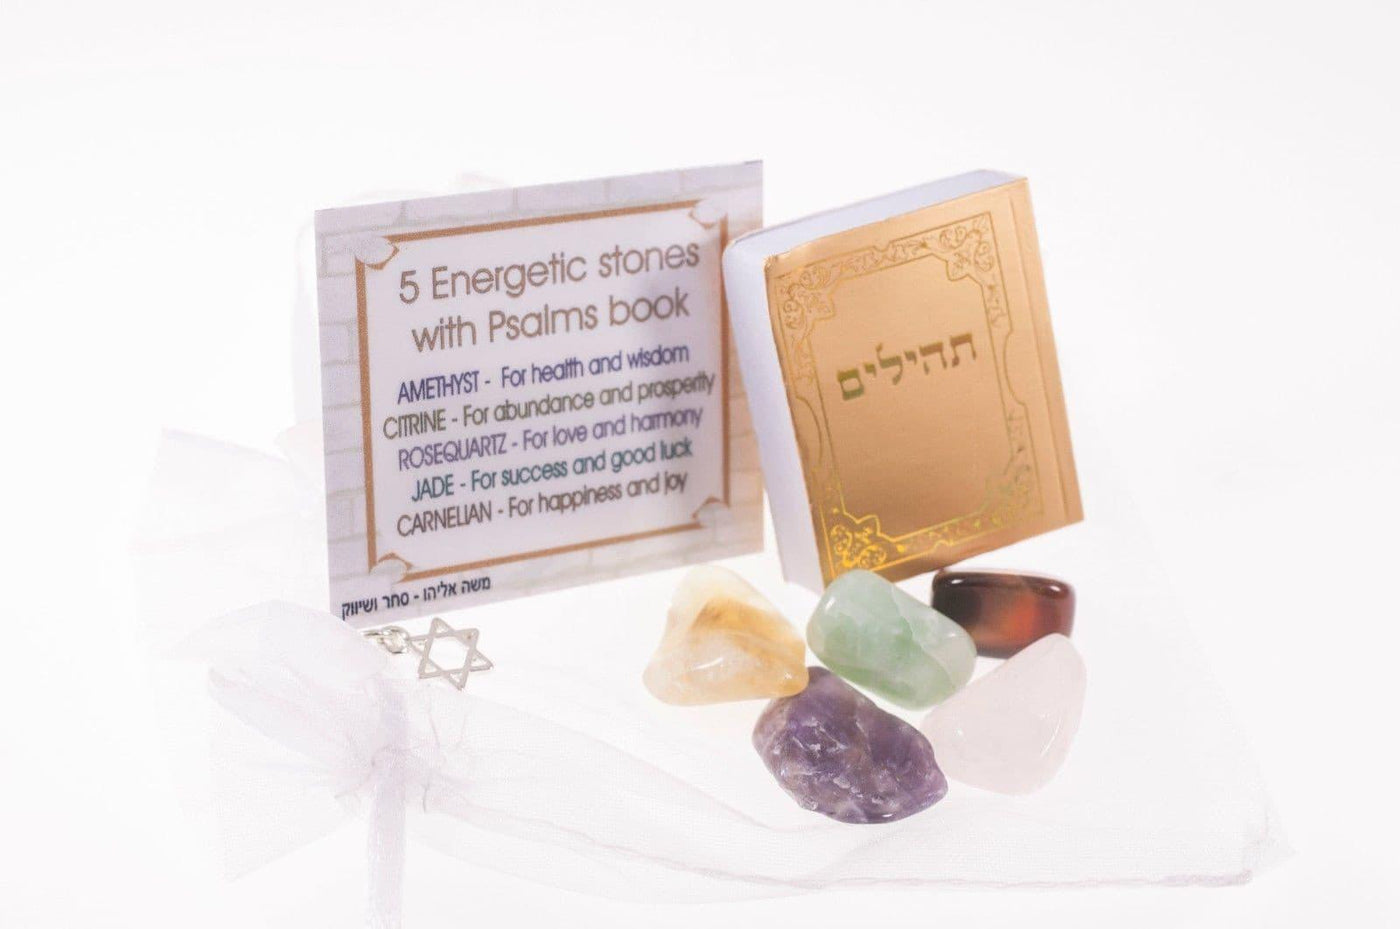 Energetic Stones with Psalms book(in english).